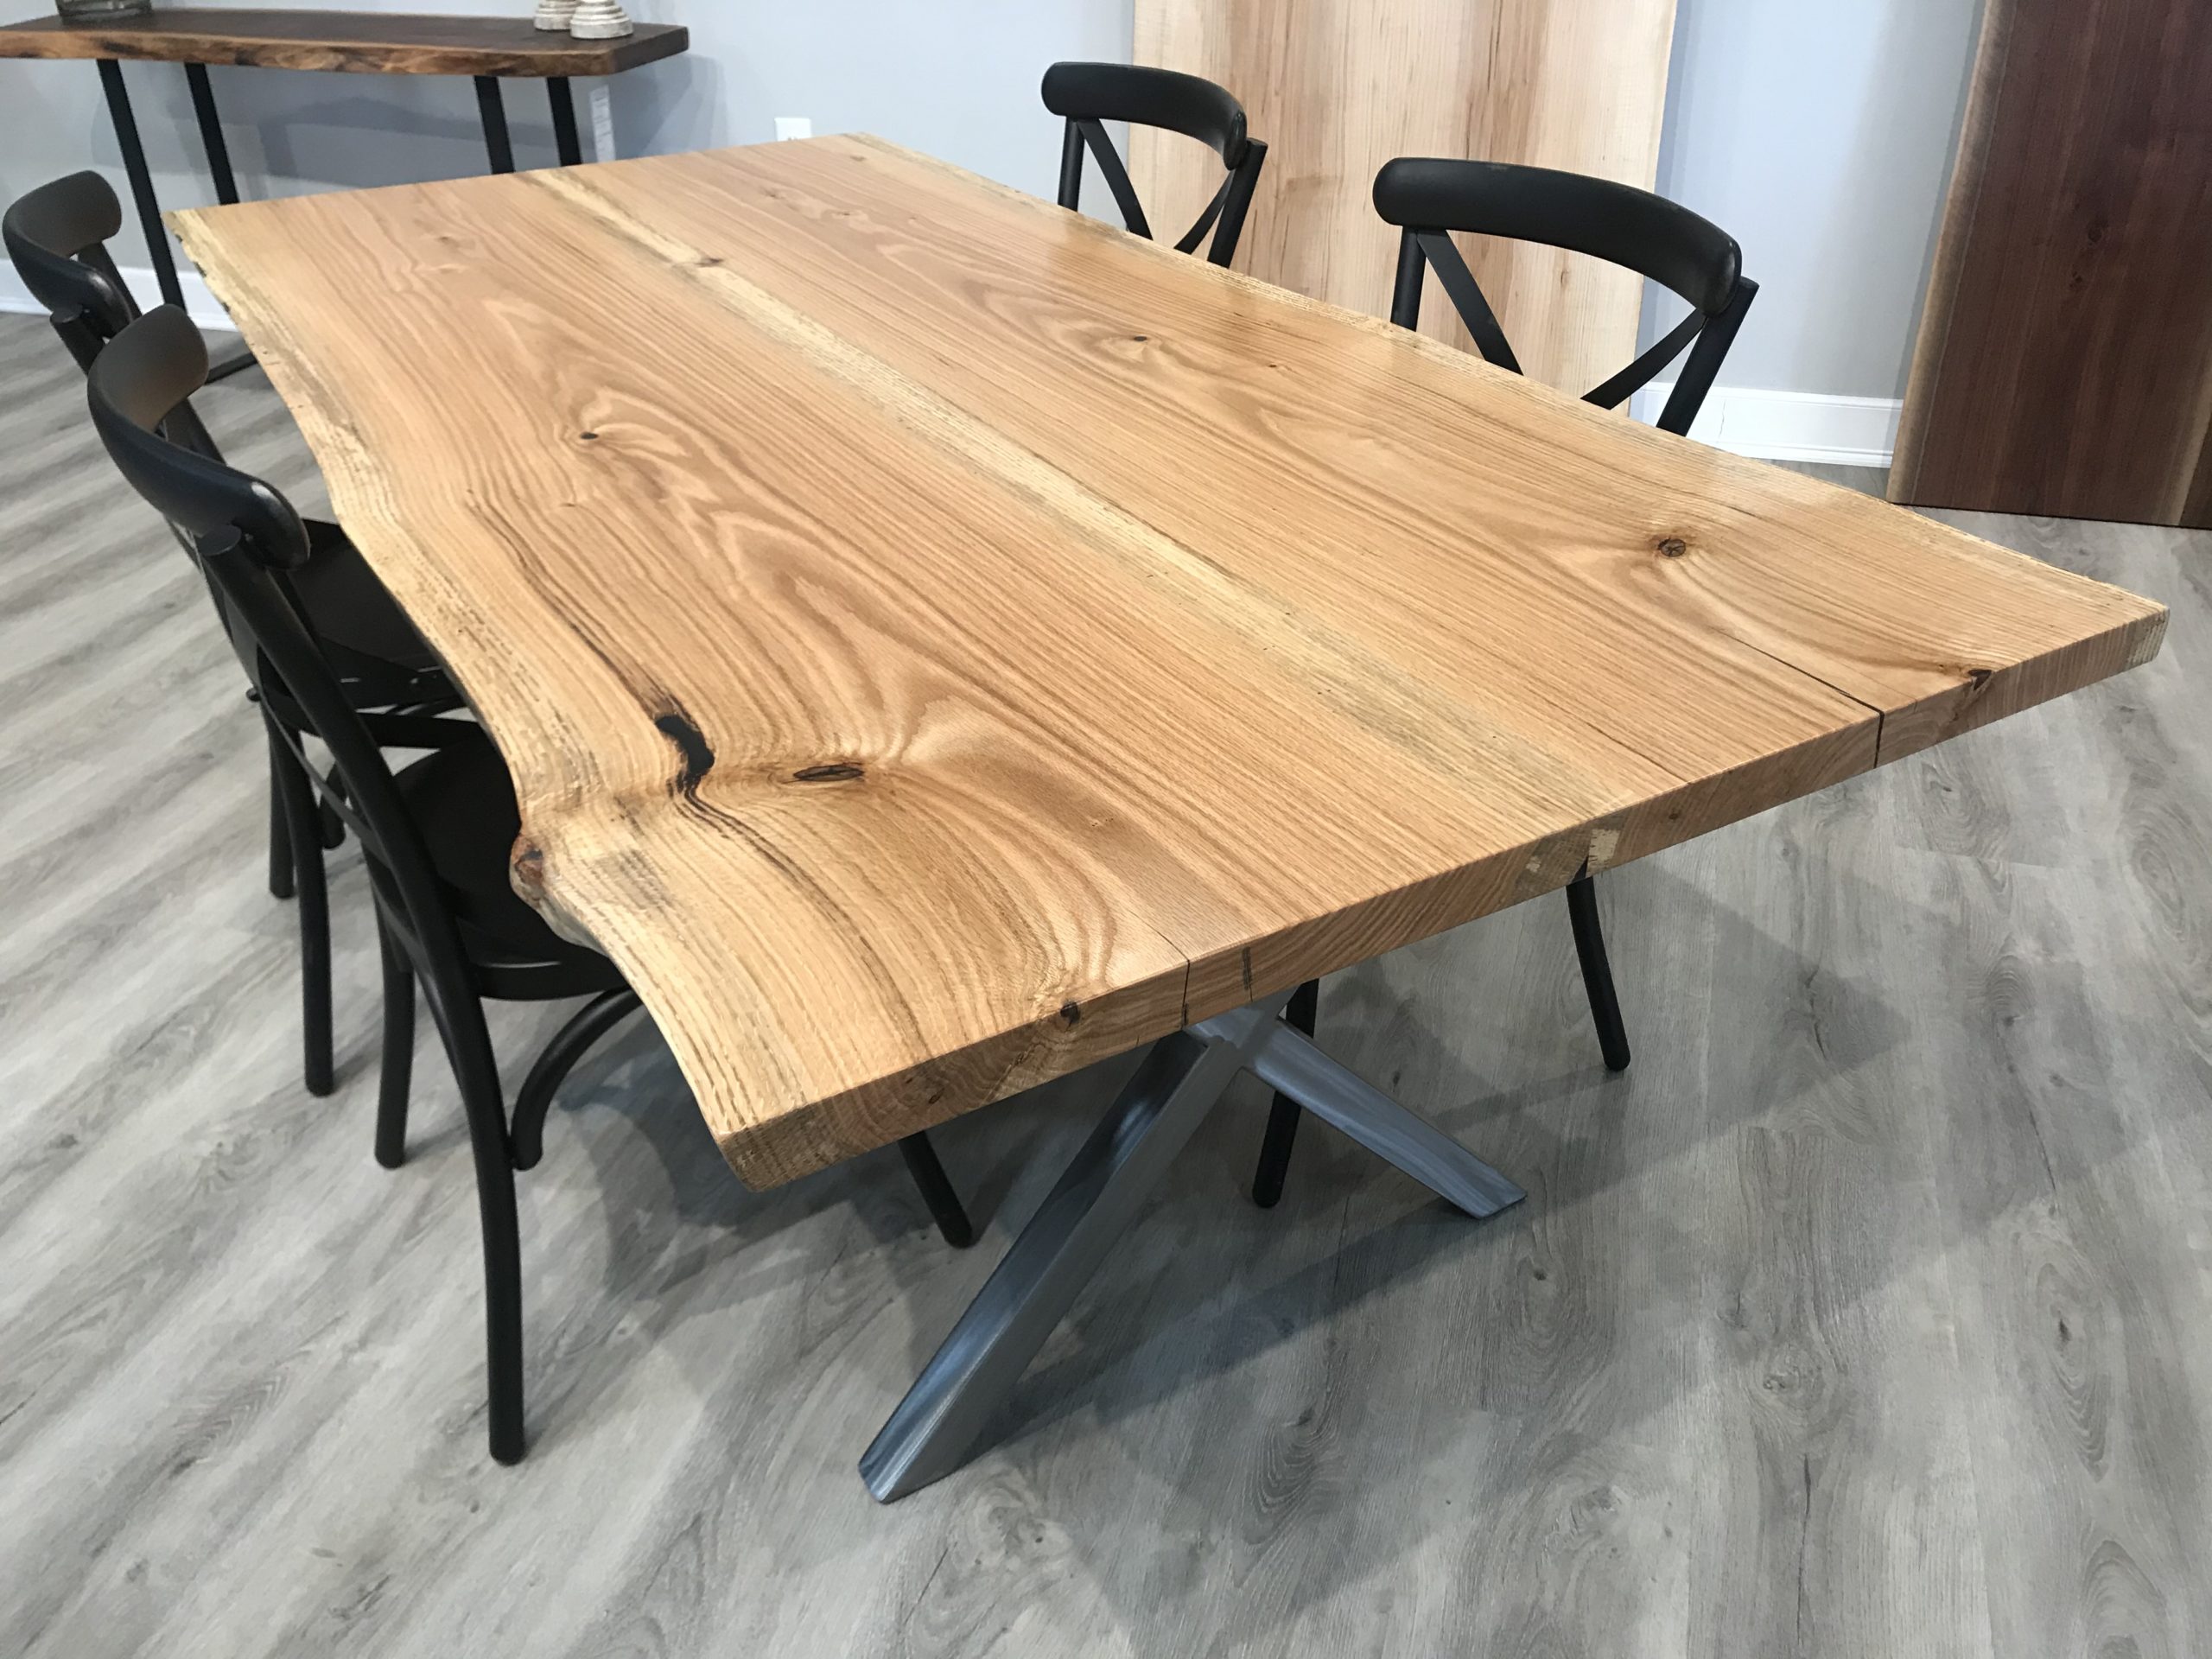 Oak Dining Room Table No Chairs